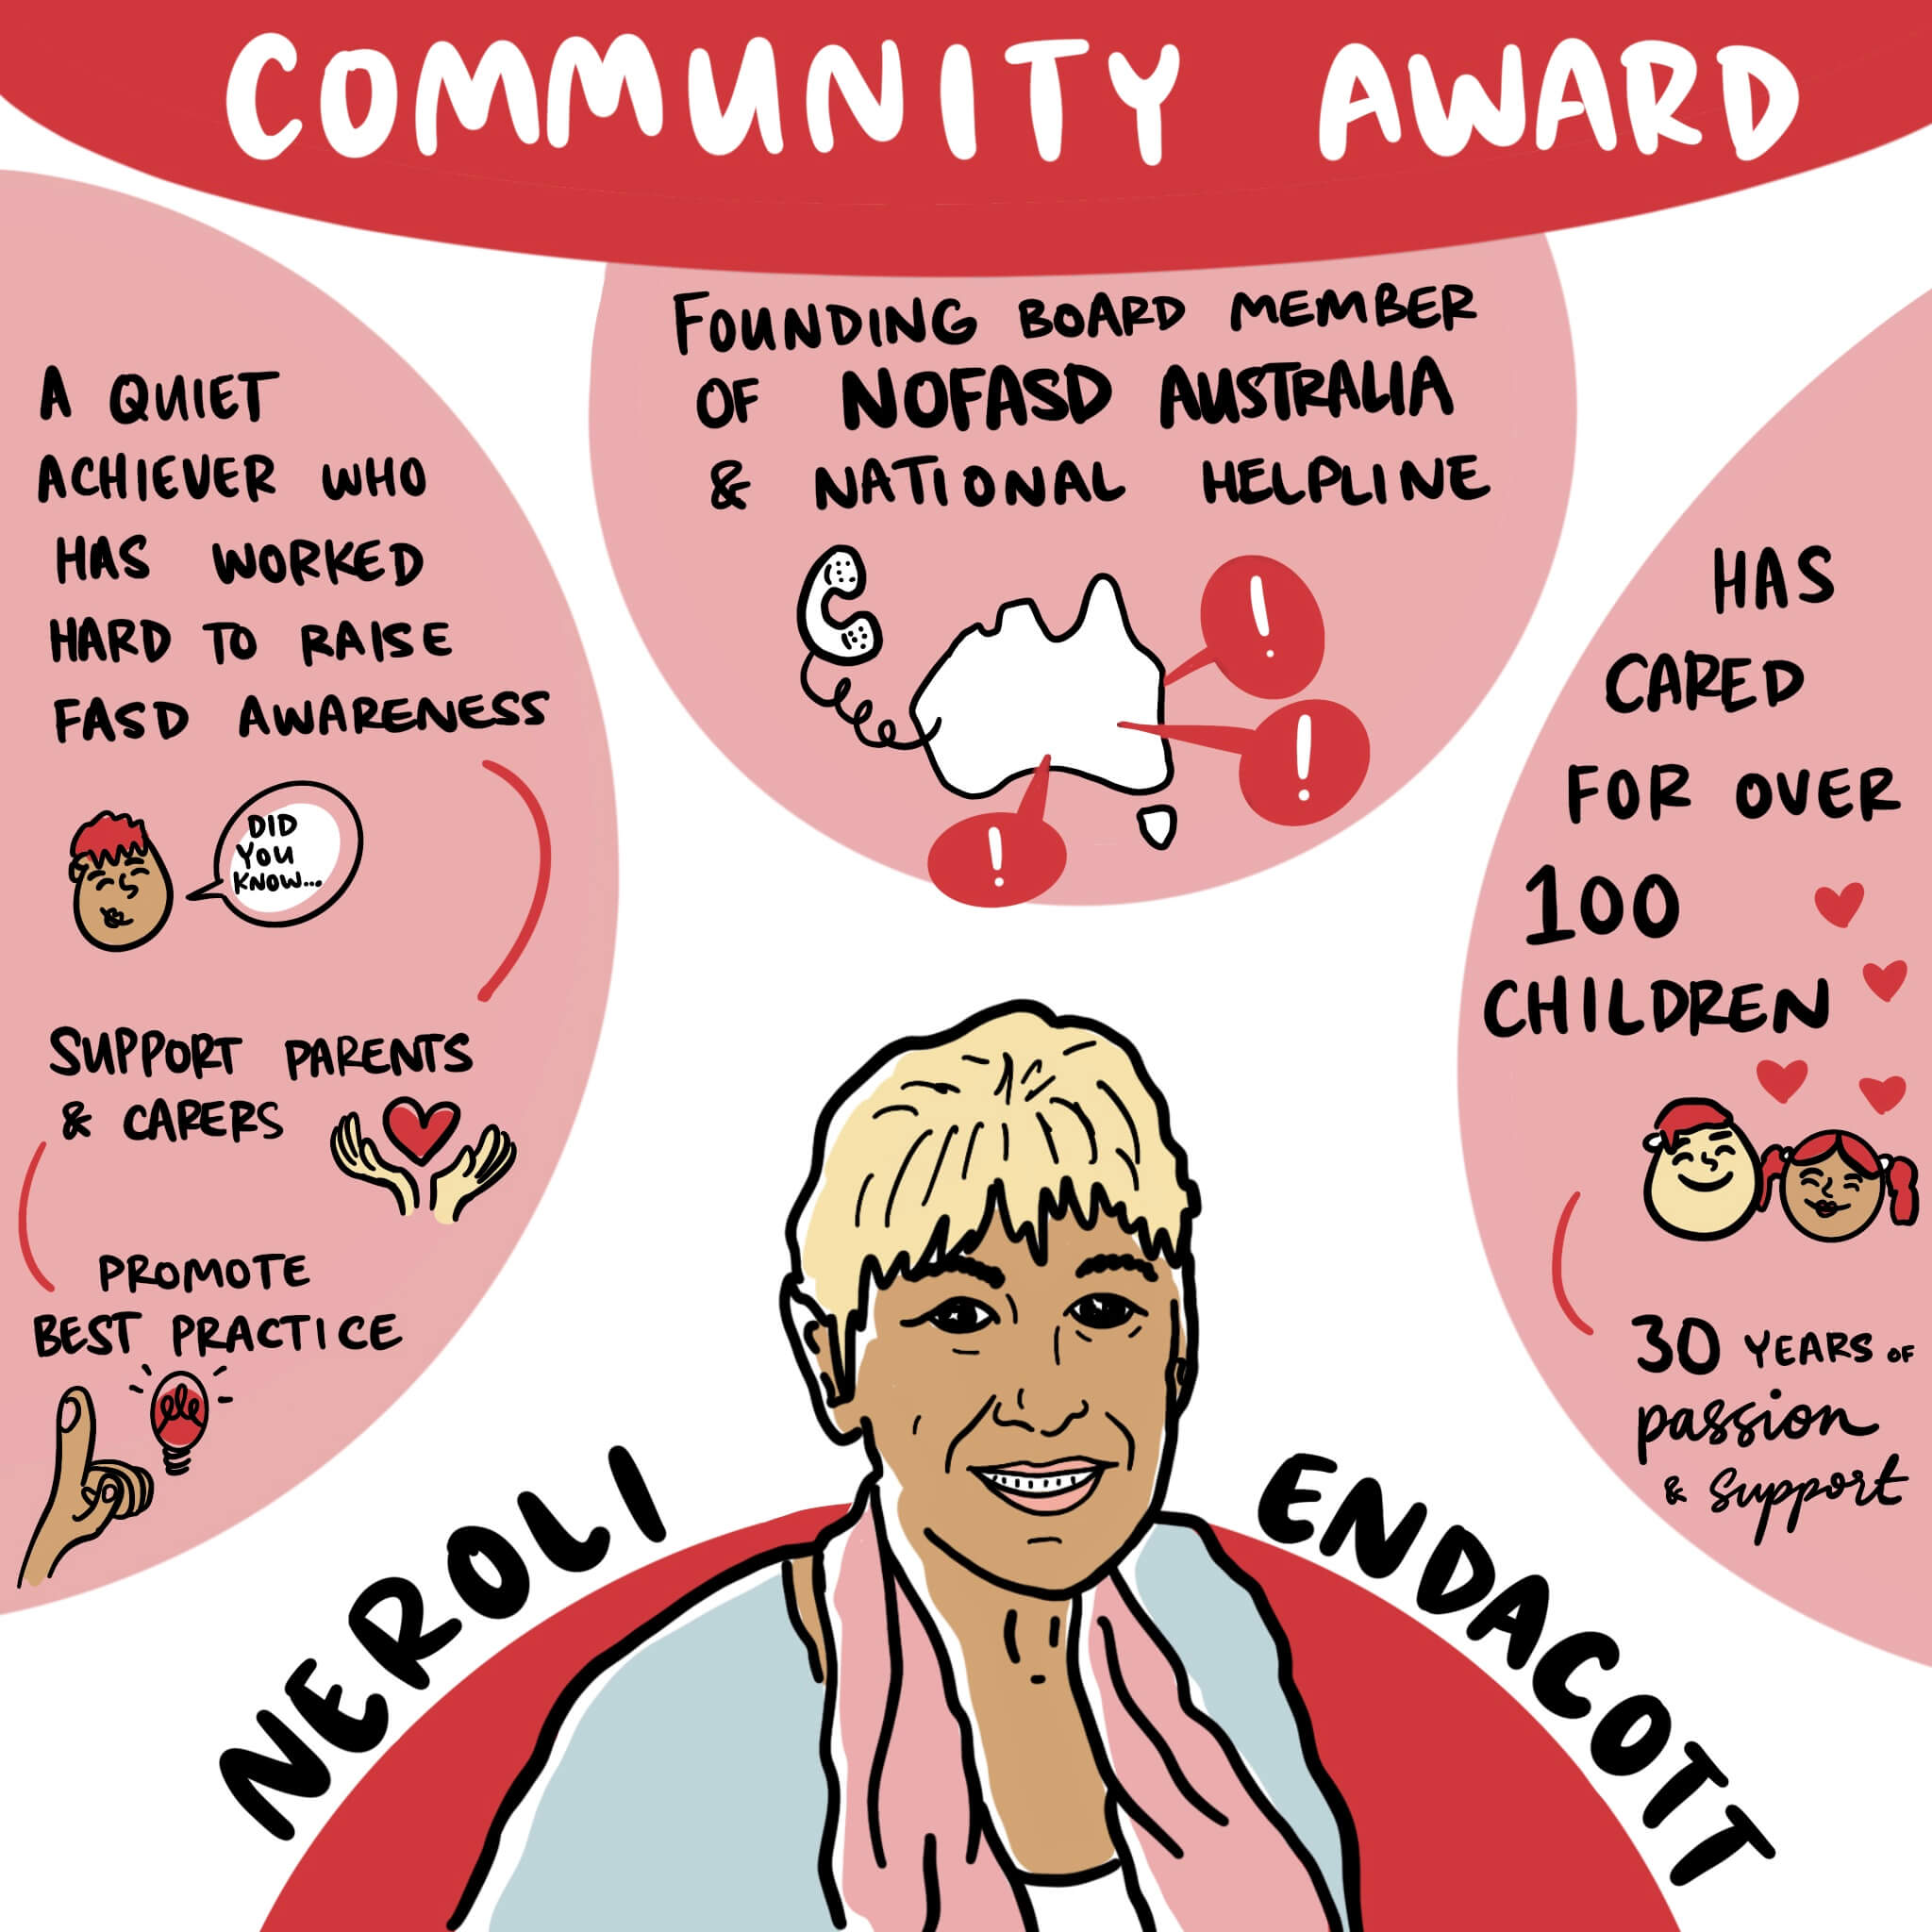 Illustration of Neroli Endacott with a mind map of her achievements